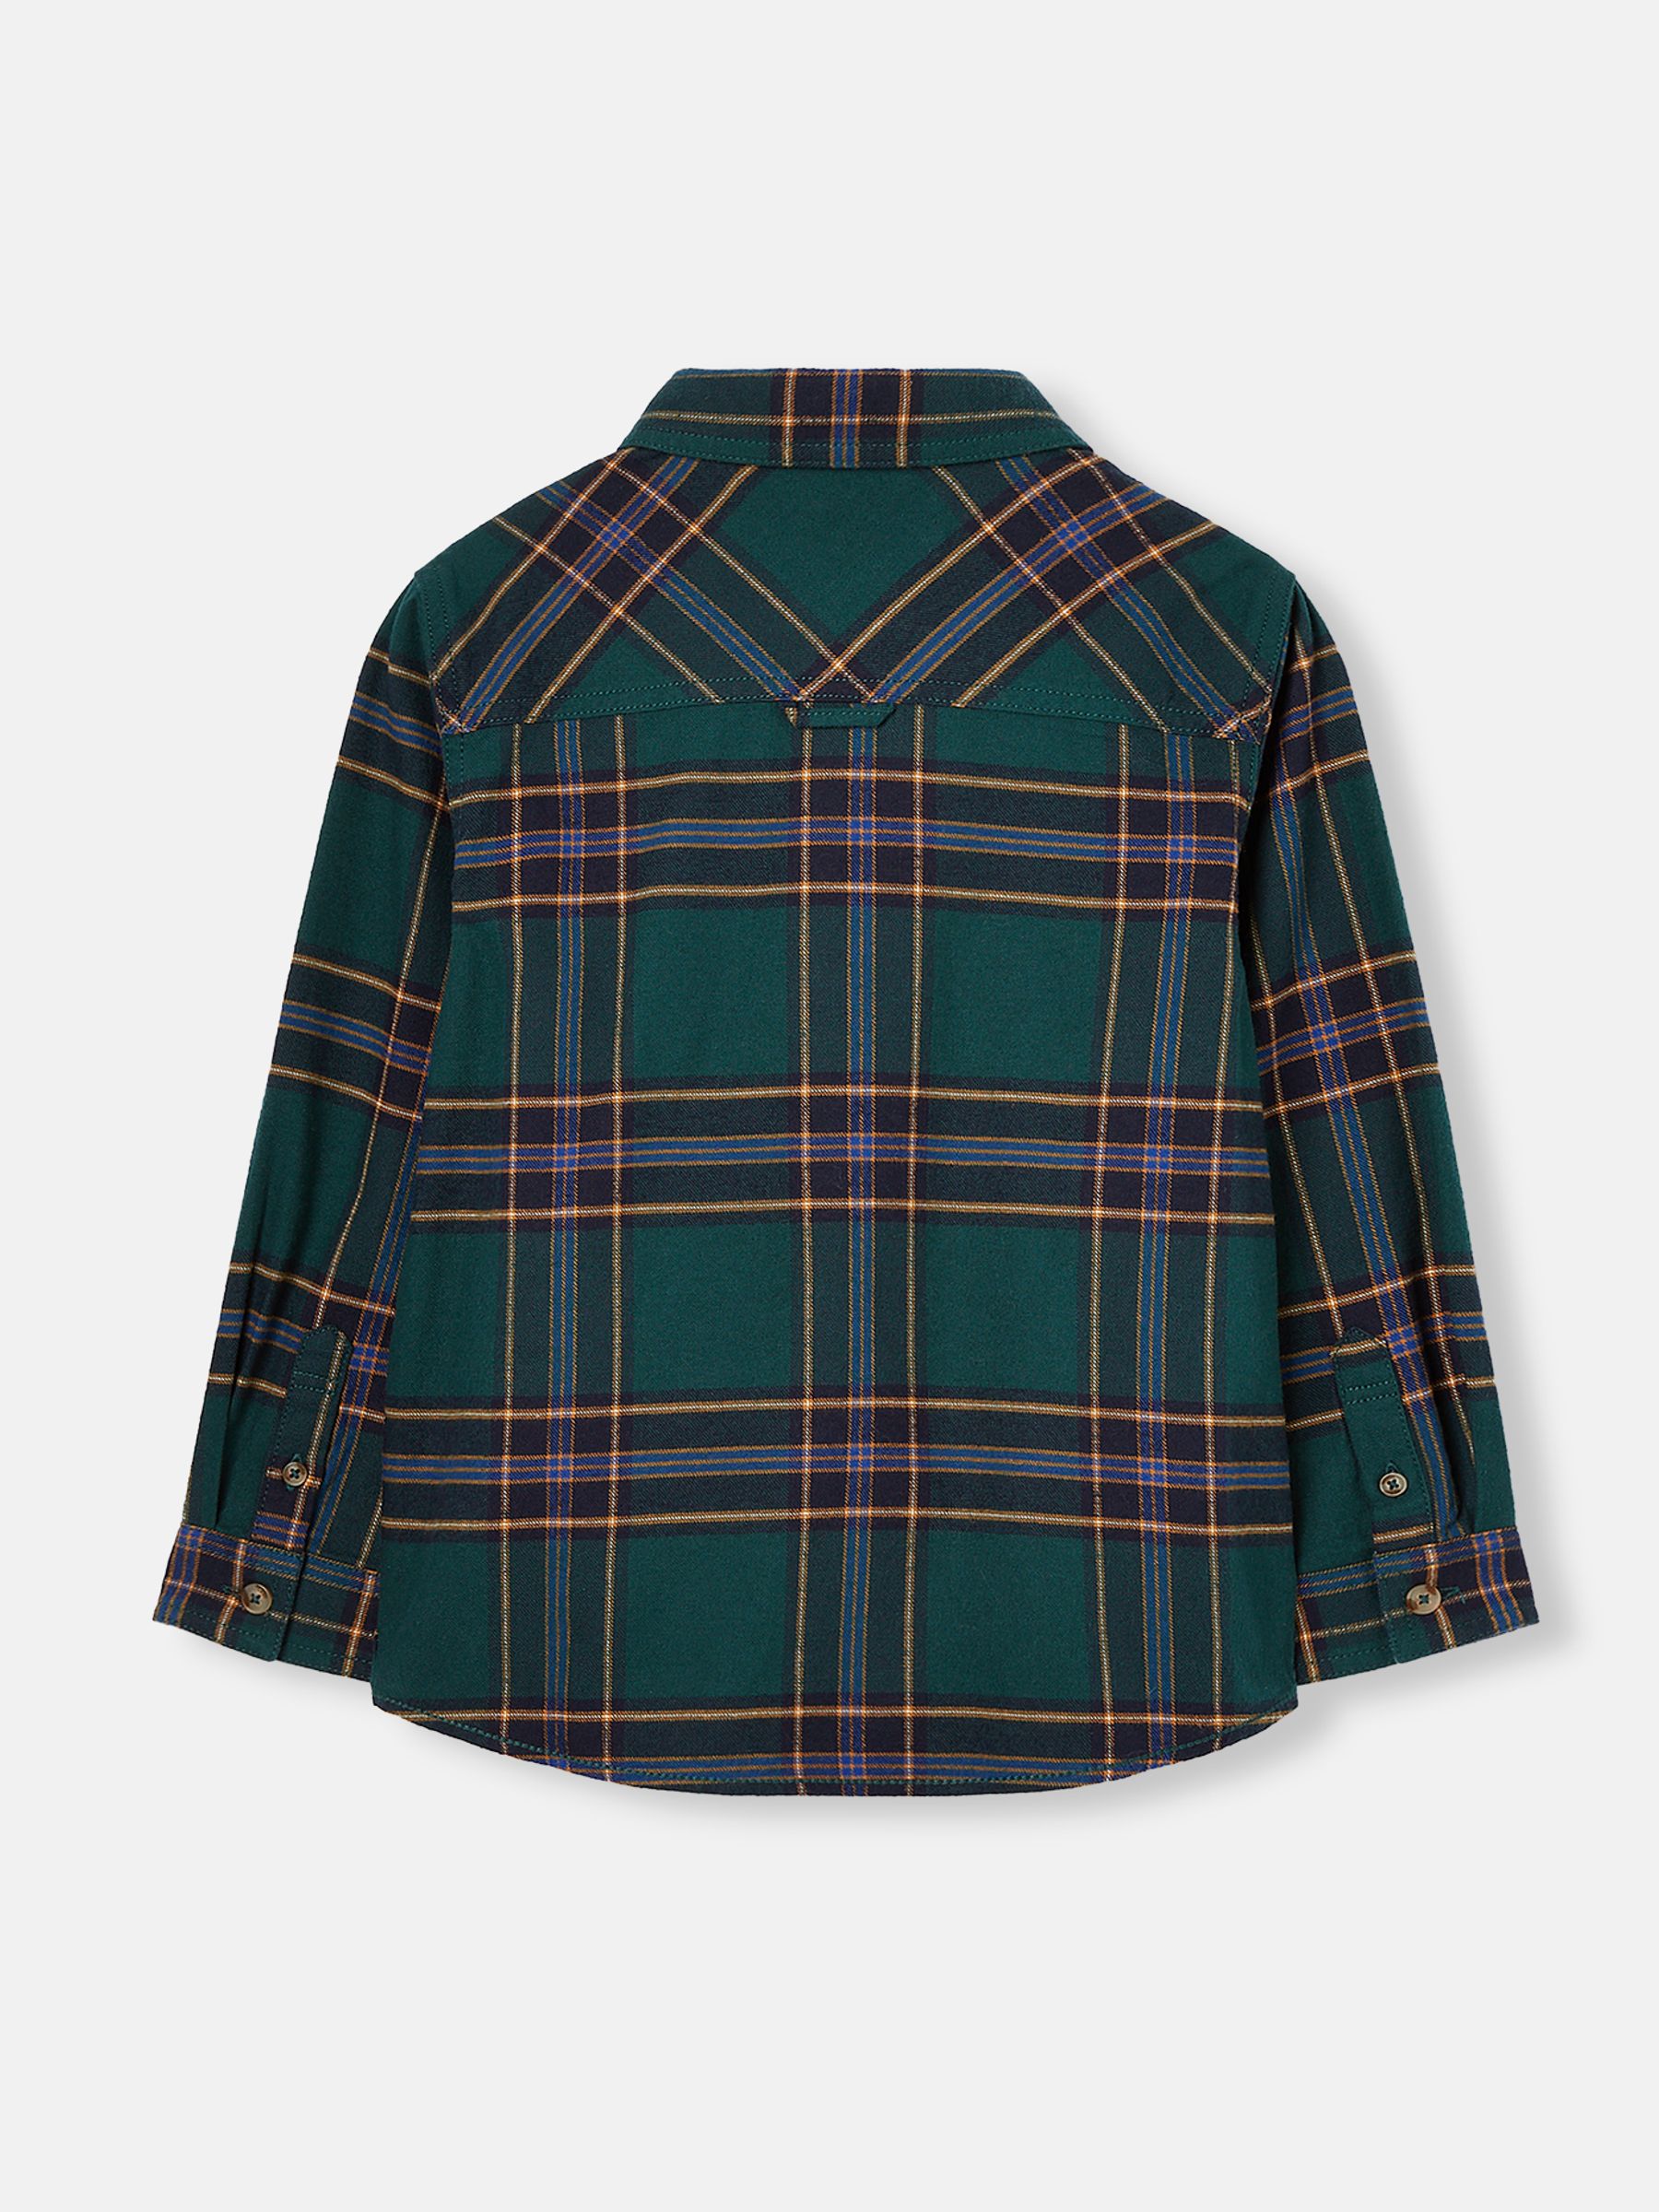 Buy Buchannan Green Checked Brushed Shirt from the Joules online shop